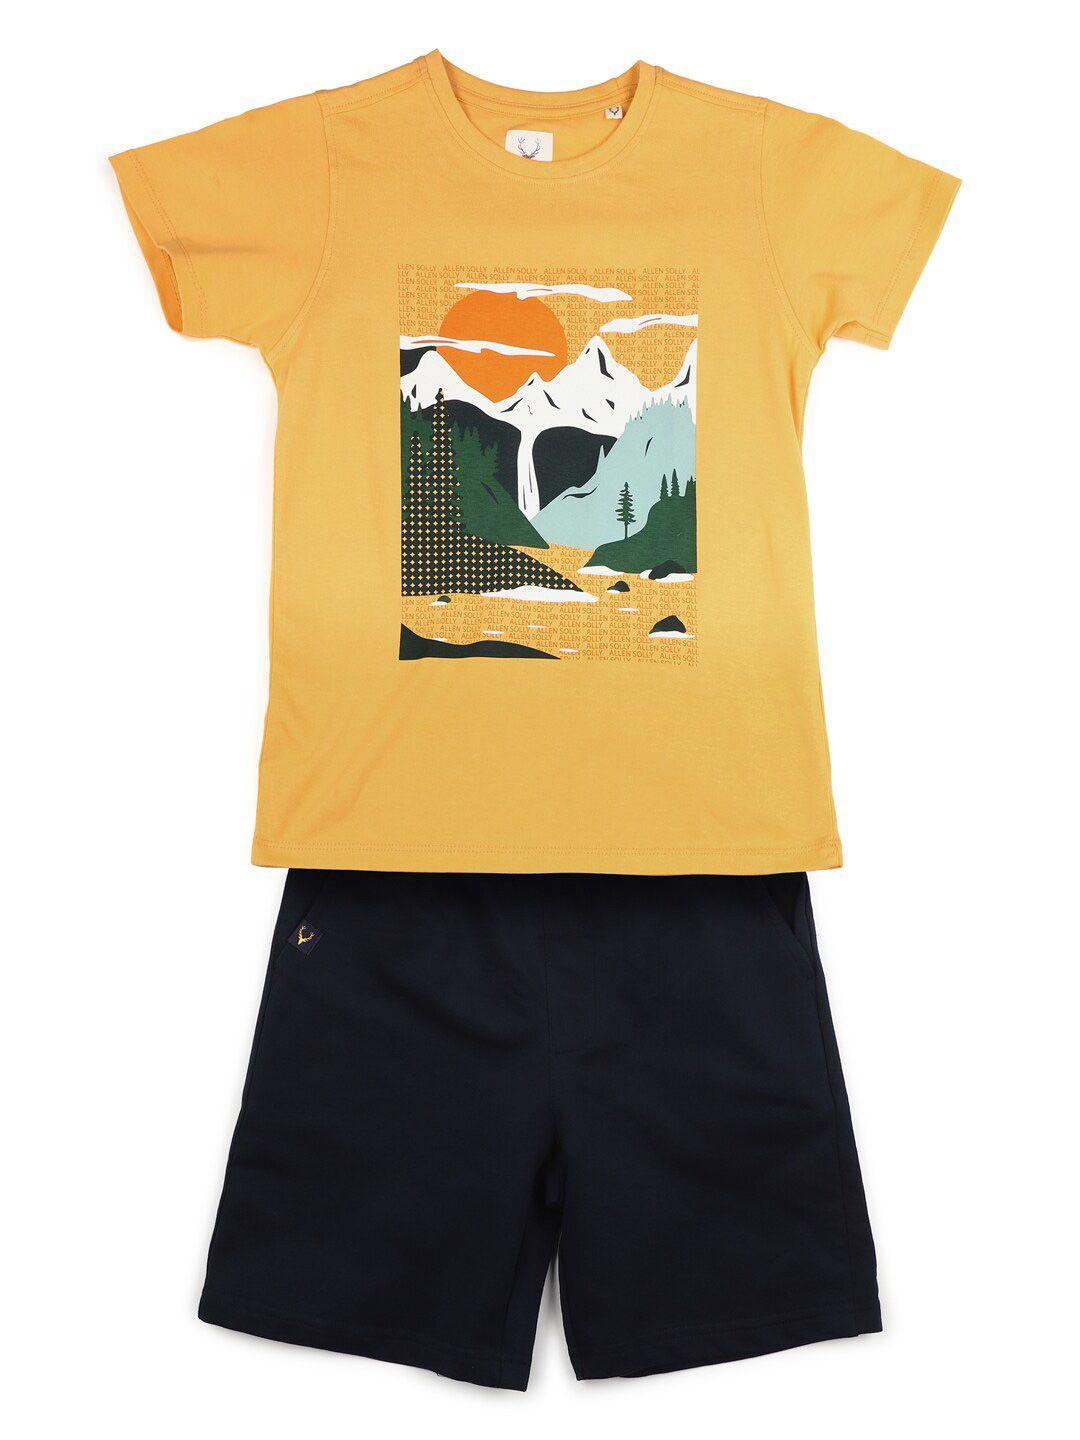 allen solly junior boys yellow & black printed pure cotton t-shirt with shorts